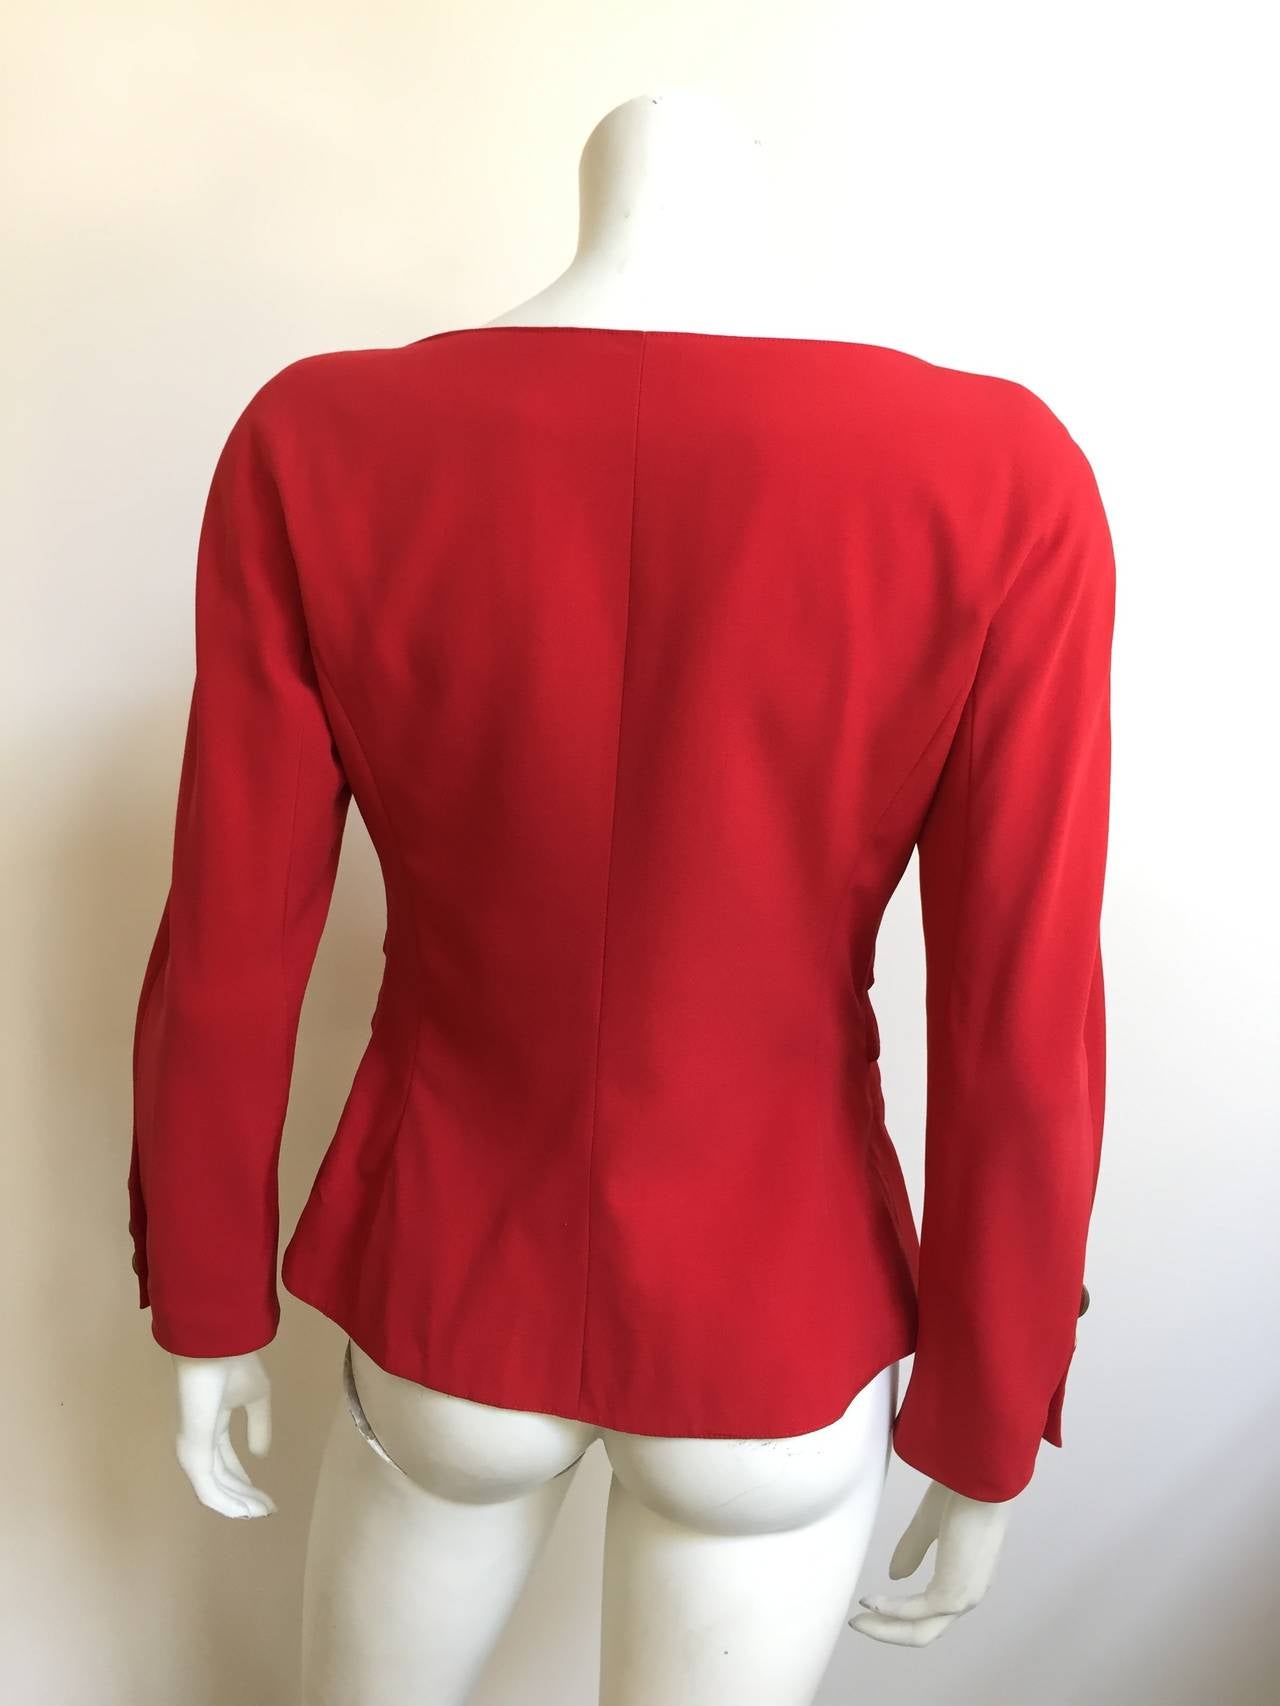 Jacques Molko 1980s Red Woven Wool Jacket Size 6. For Sale at 1stdibs